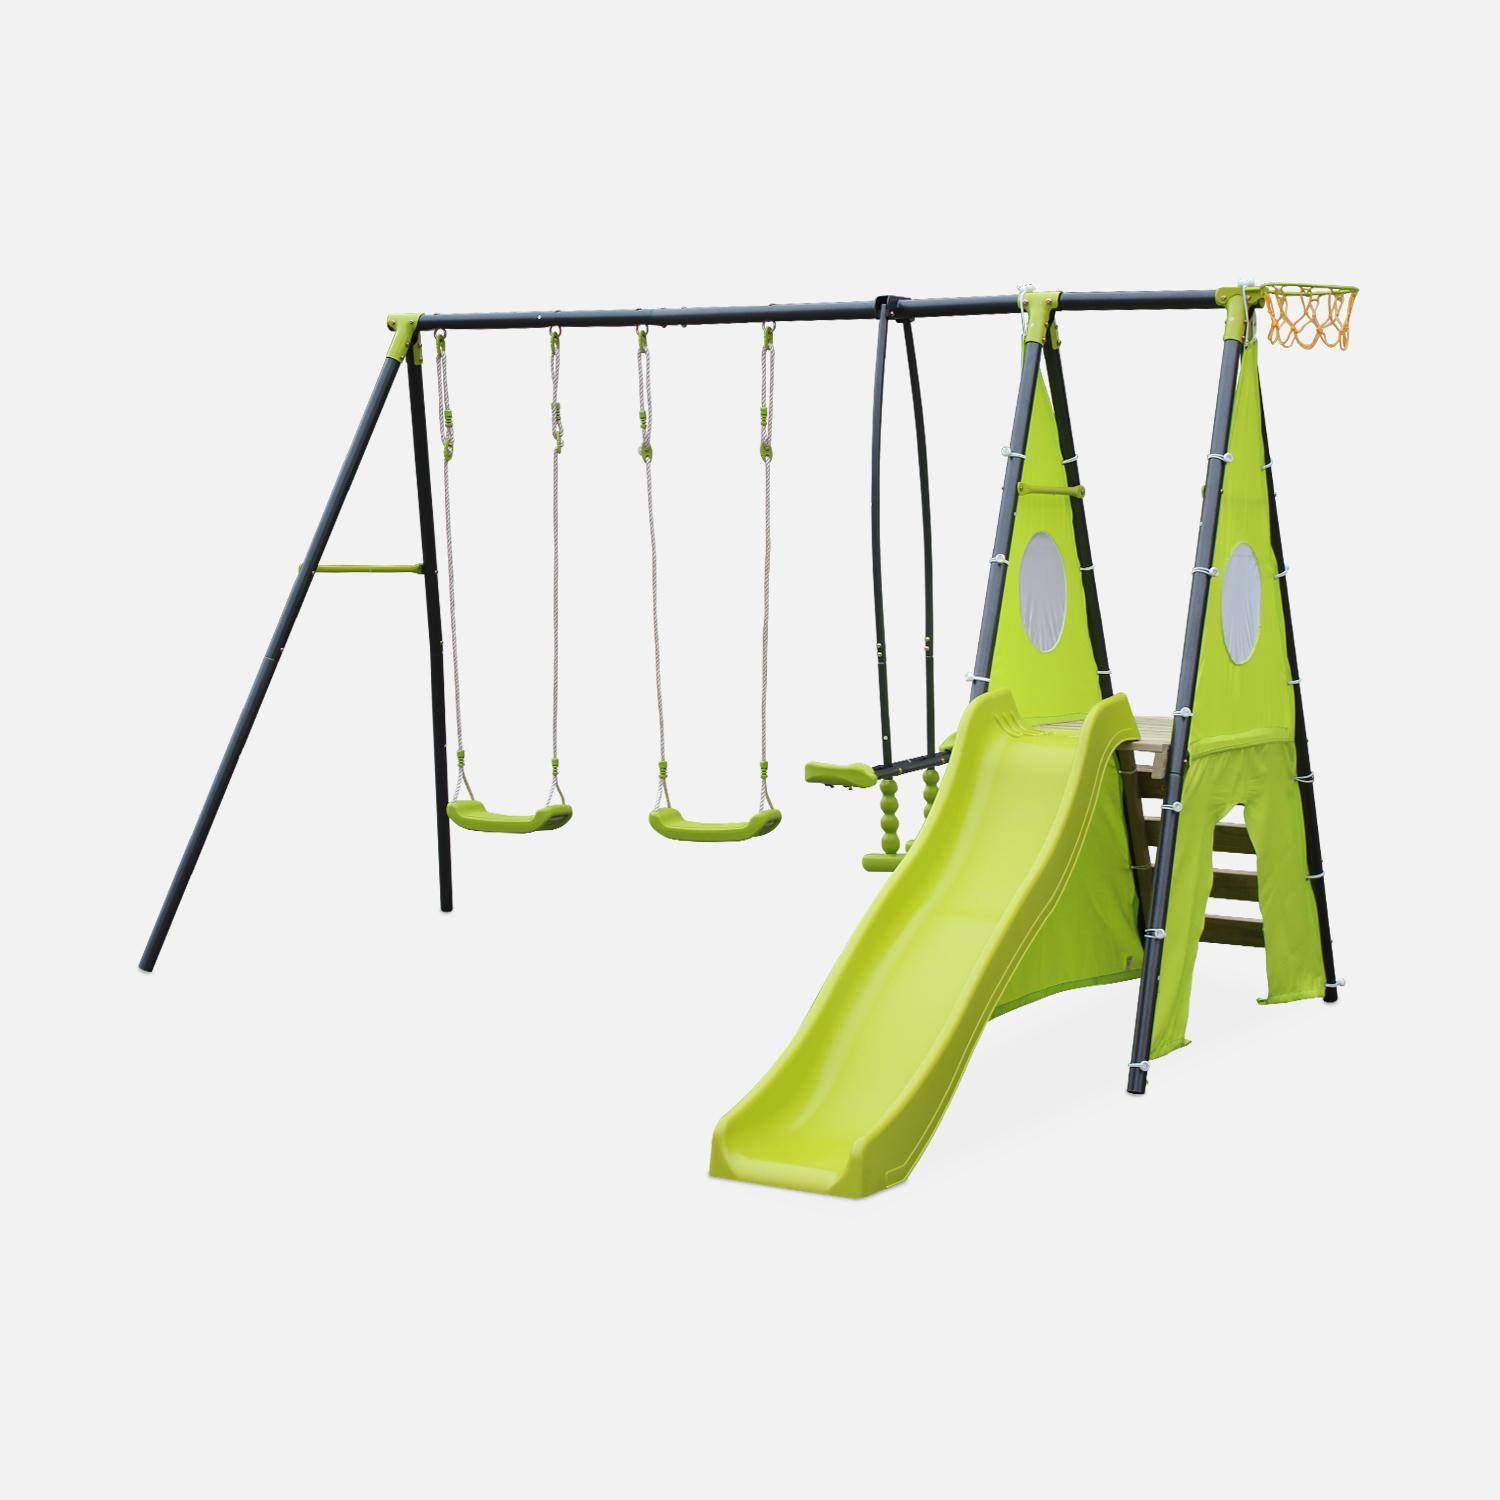 5-piece swing: 2 swings, 1 face to face, 1 slide, 1 basketball hoop, 1 climbing wall and 1 tipi, Libeccio Photo1